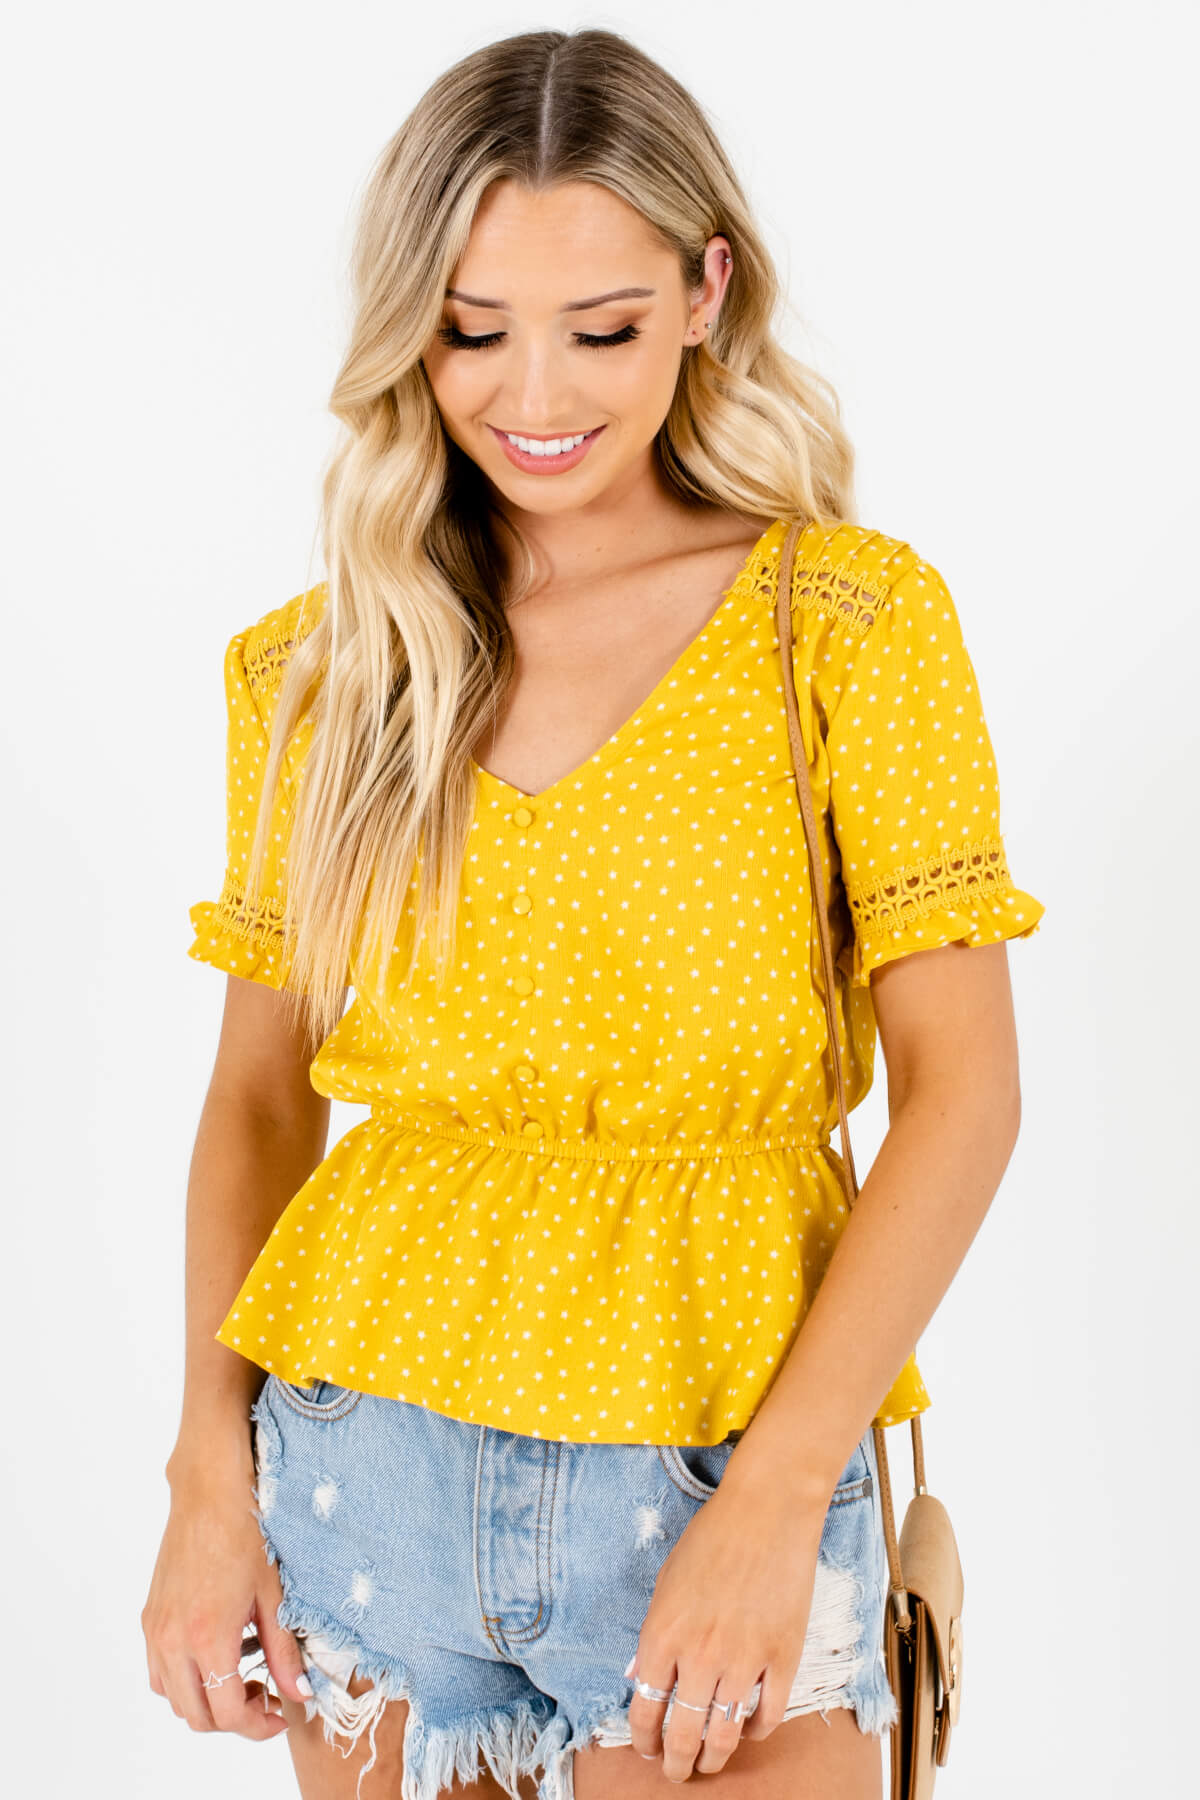 Yellow Star Print Peplum Tops Affordable Online Boutique